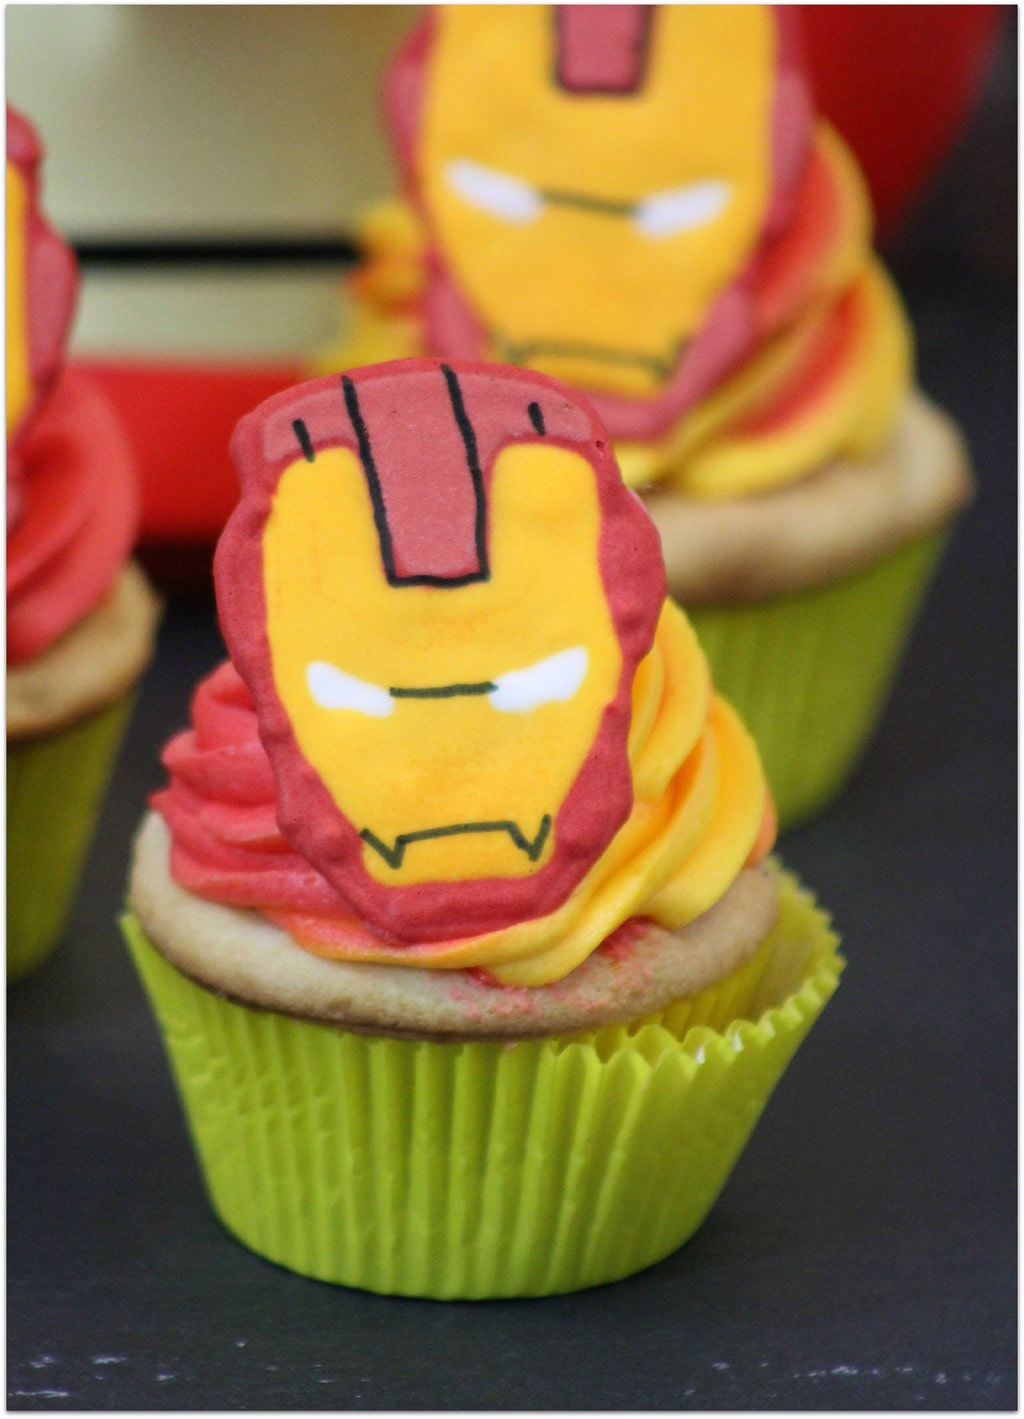 Who's ready for Iron Man Cupcakes? Have you decided who you're going to support in Captain America: Civil War? I know which team I'm on!